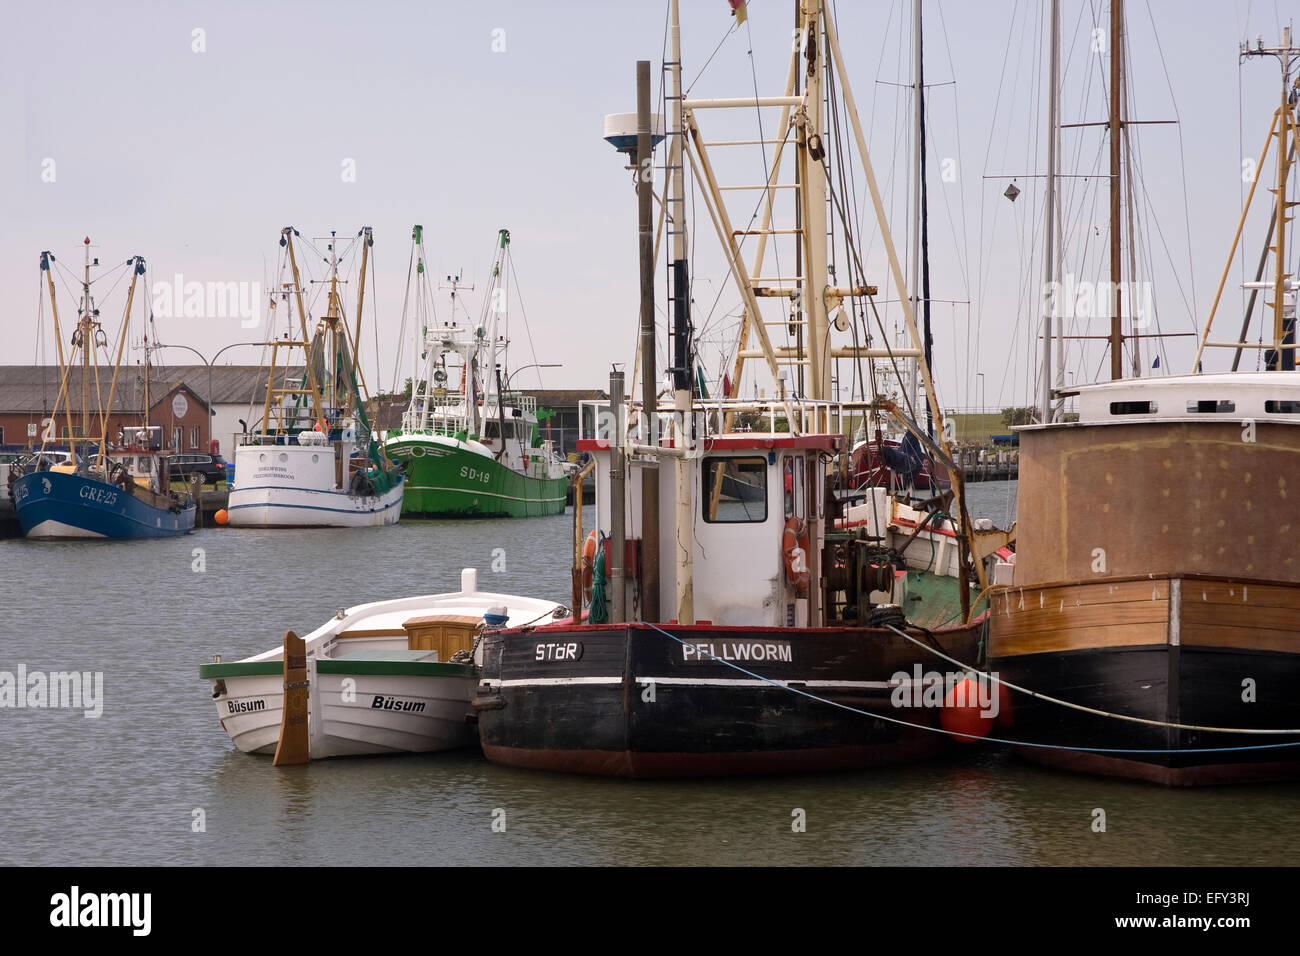 Fishing cutters in the harbor of Buesum, Dithmarschen district, Schleswig-Holstein, North Sea, Germany, Europe Stock Photo